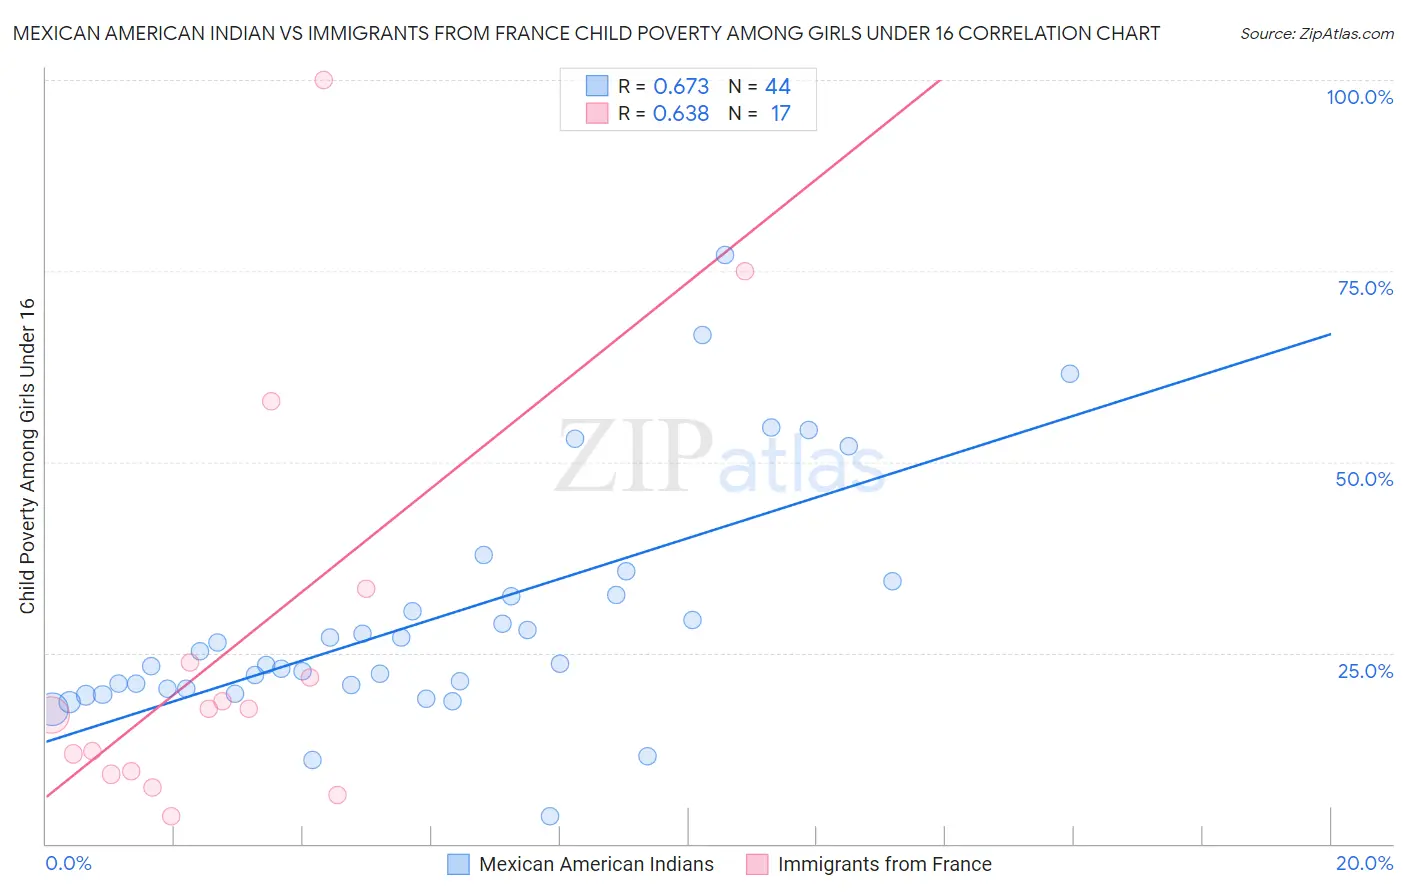 Mexican American Indian vs Immigrants from France Child Poverty Among Girls Under 16